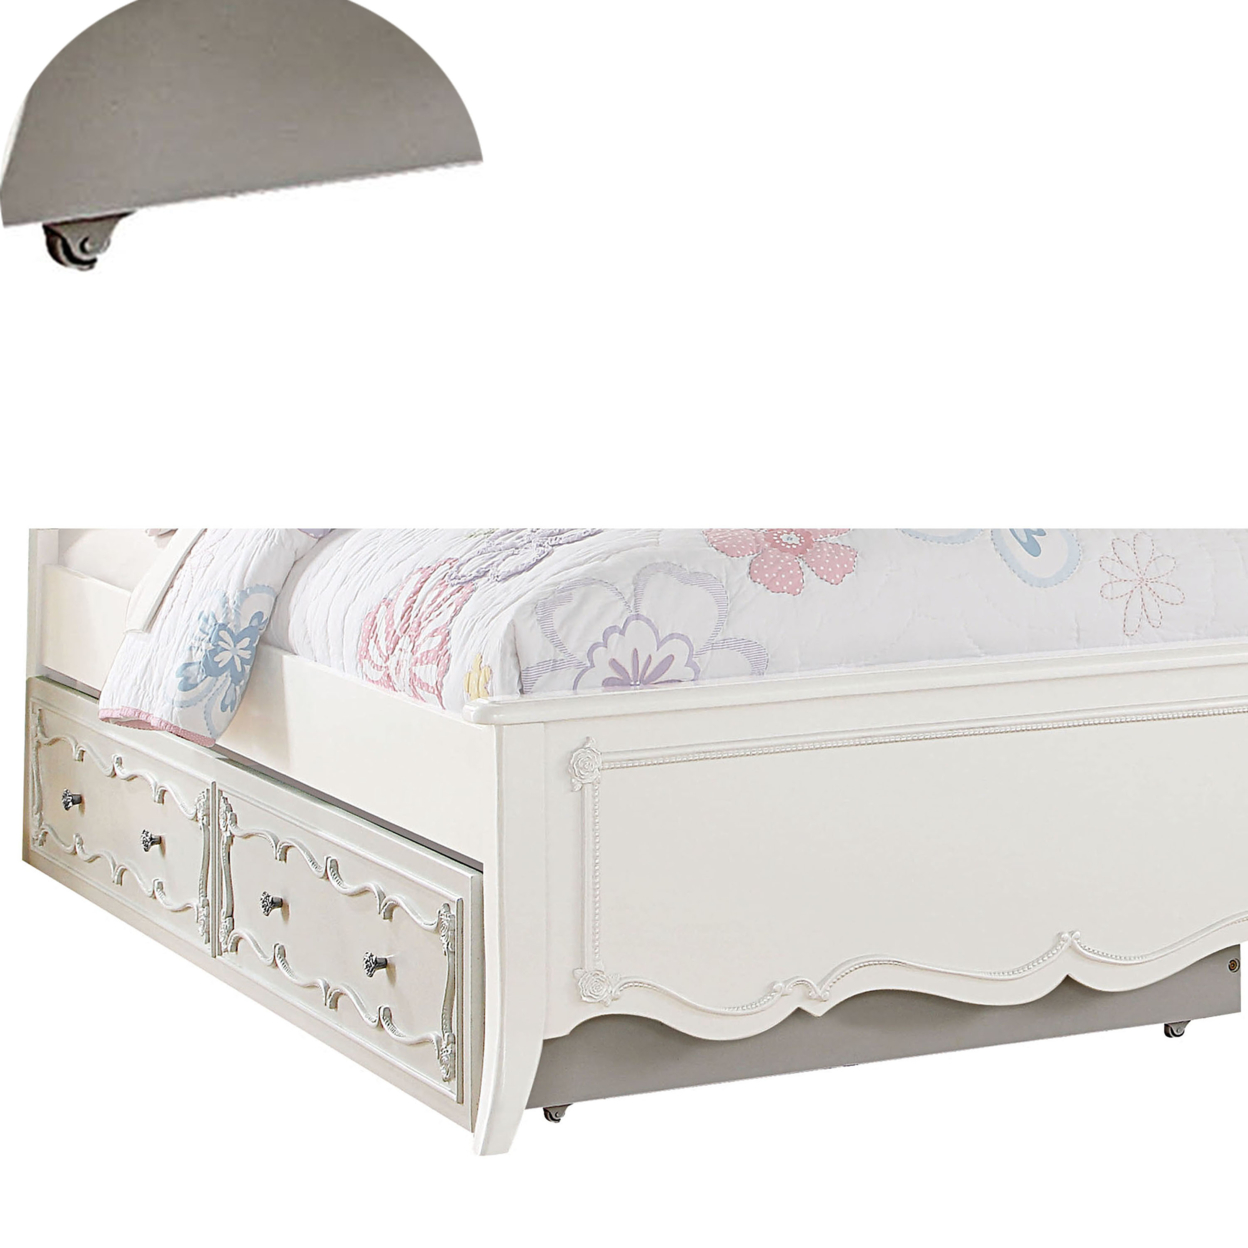 Twin Size Wooden Trundle With Round Knobs And Caster Wheels, White- Saltoro Sherpi